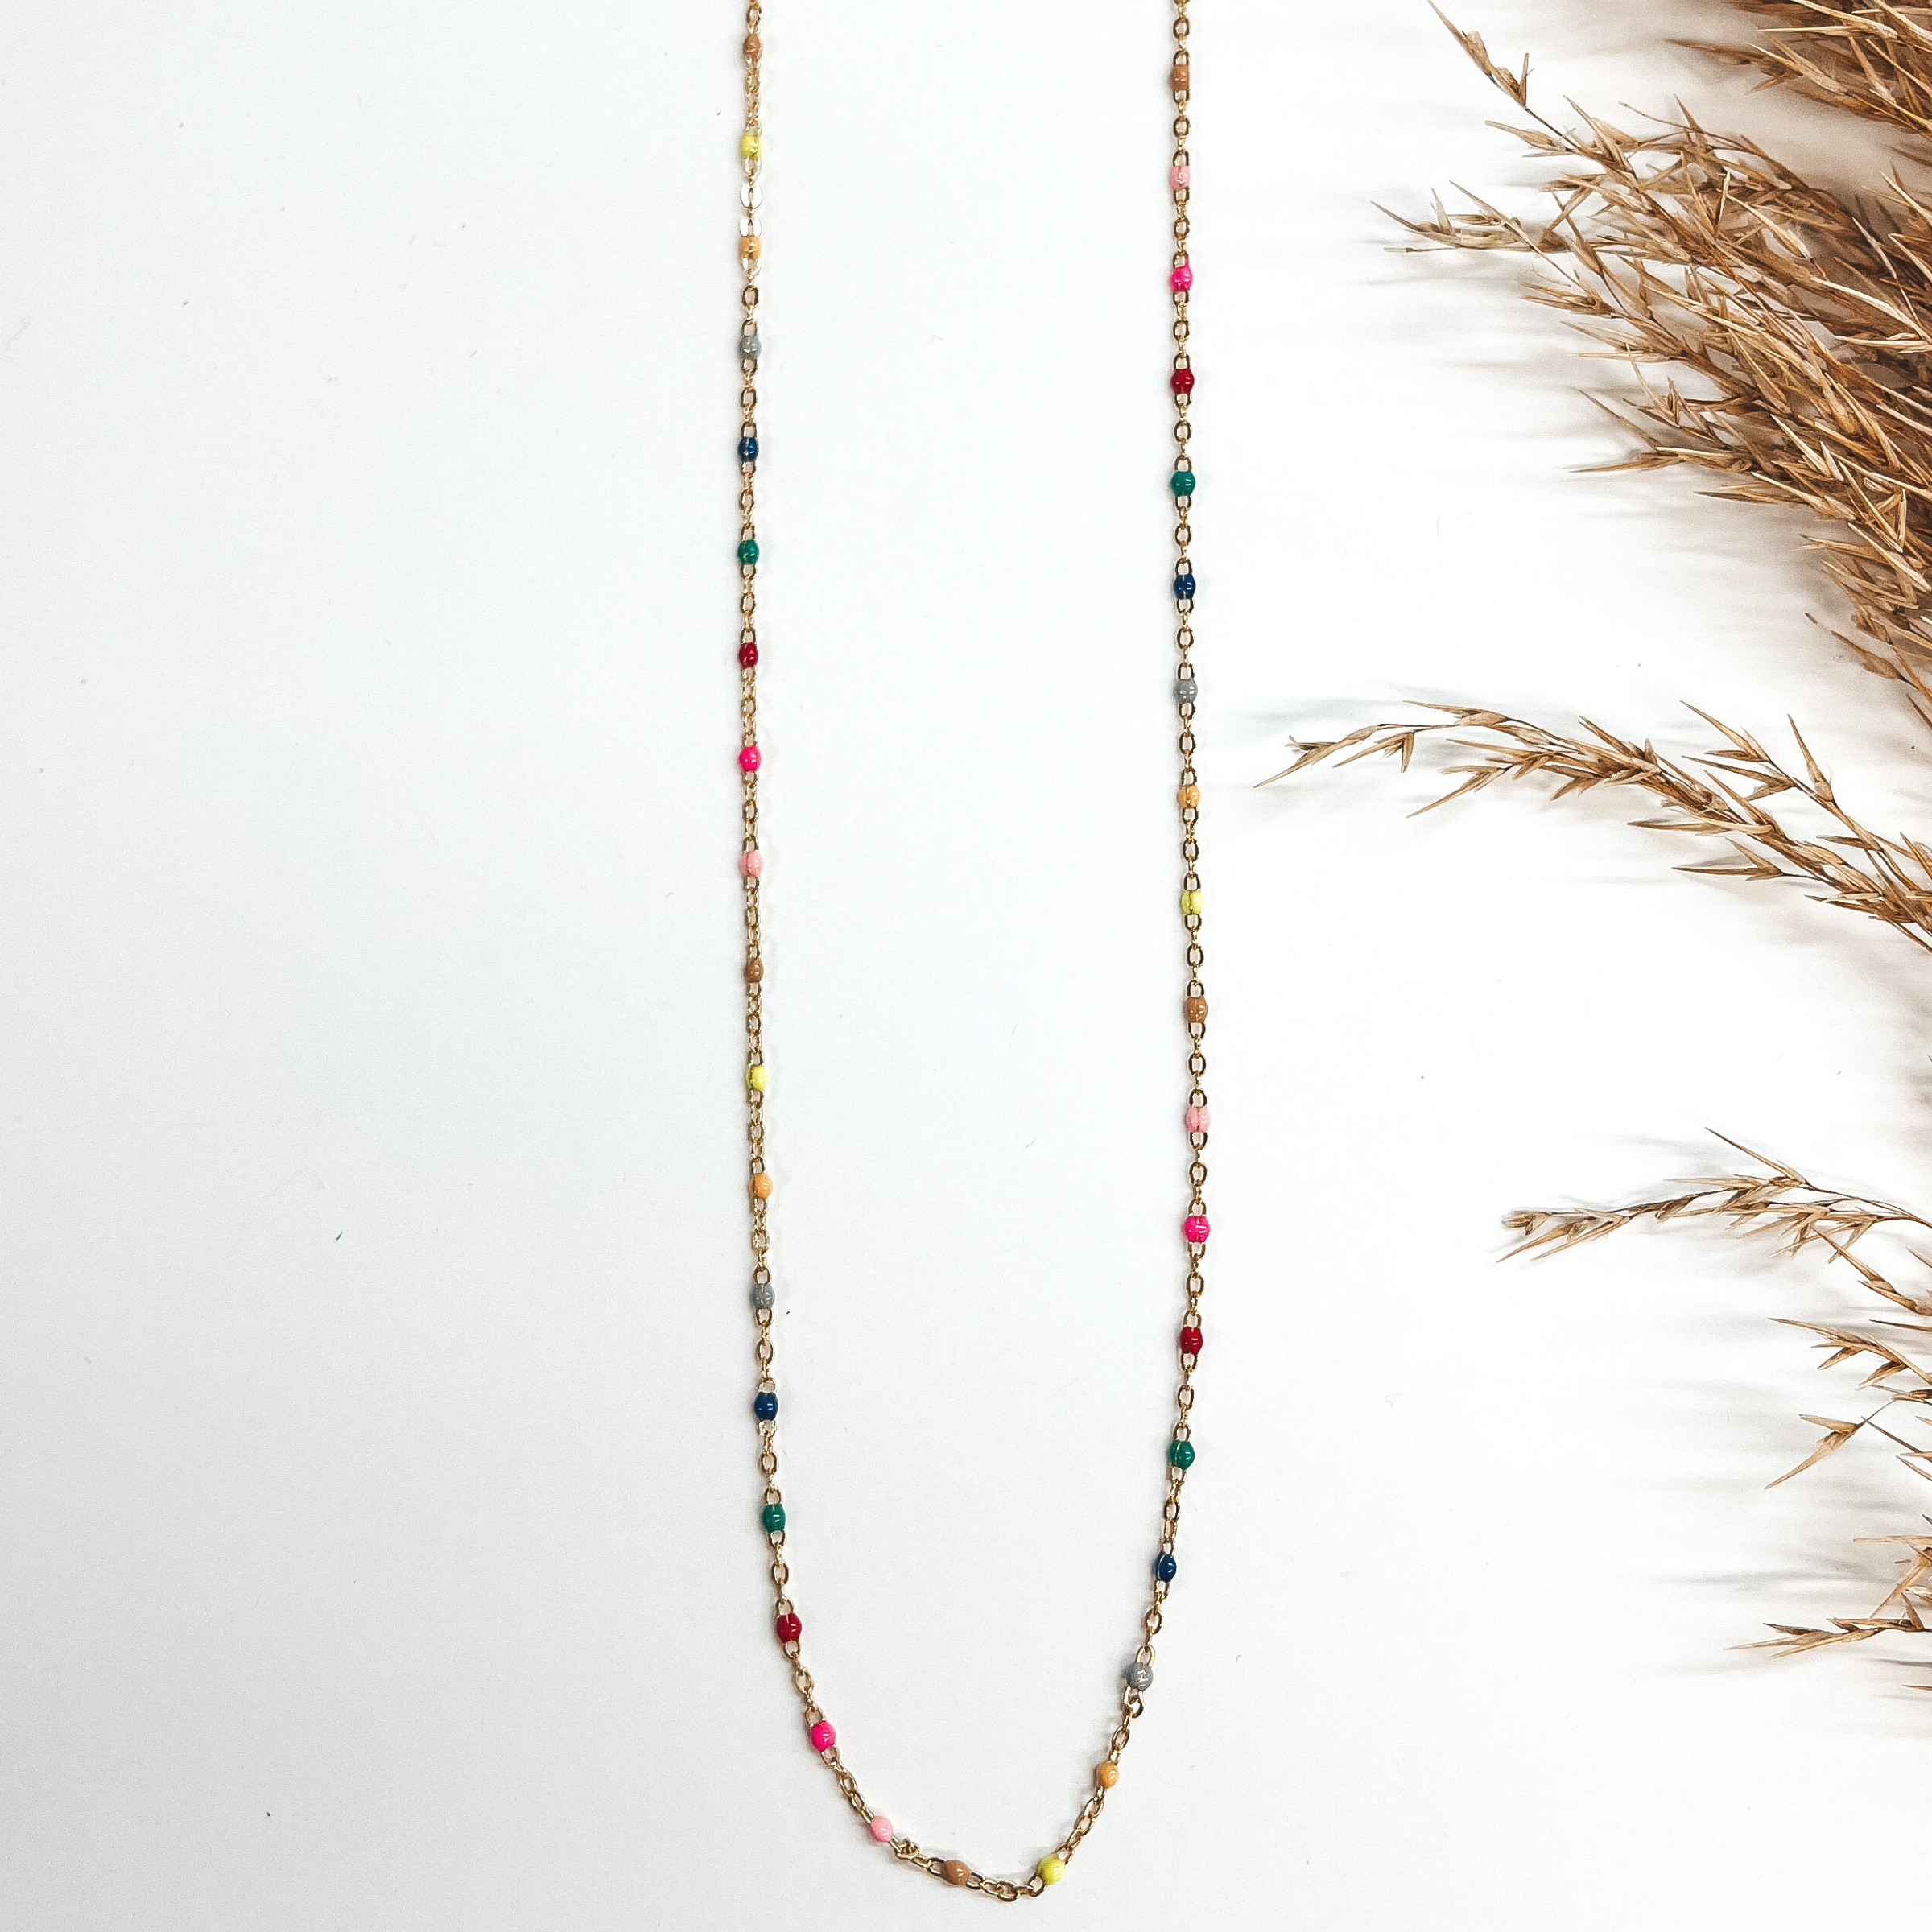 This is a thin gold chain with multicolored beads all  around. Multicolored beads come in tan, neon yellow,  mustard yellow, gray, dark blue, green, red, hot pink,  and light pink. This necklace is taken on a white  background with a brown plant in the side as decor.